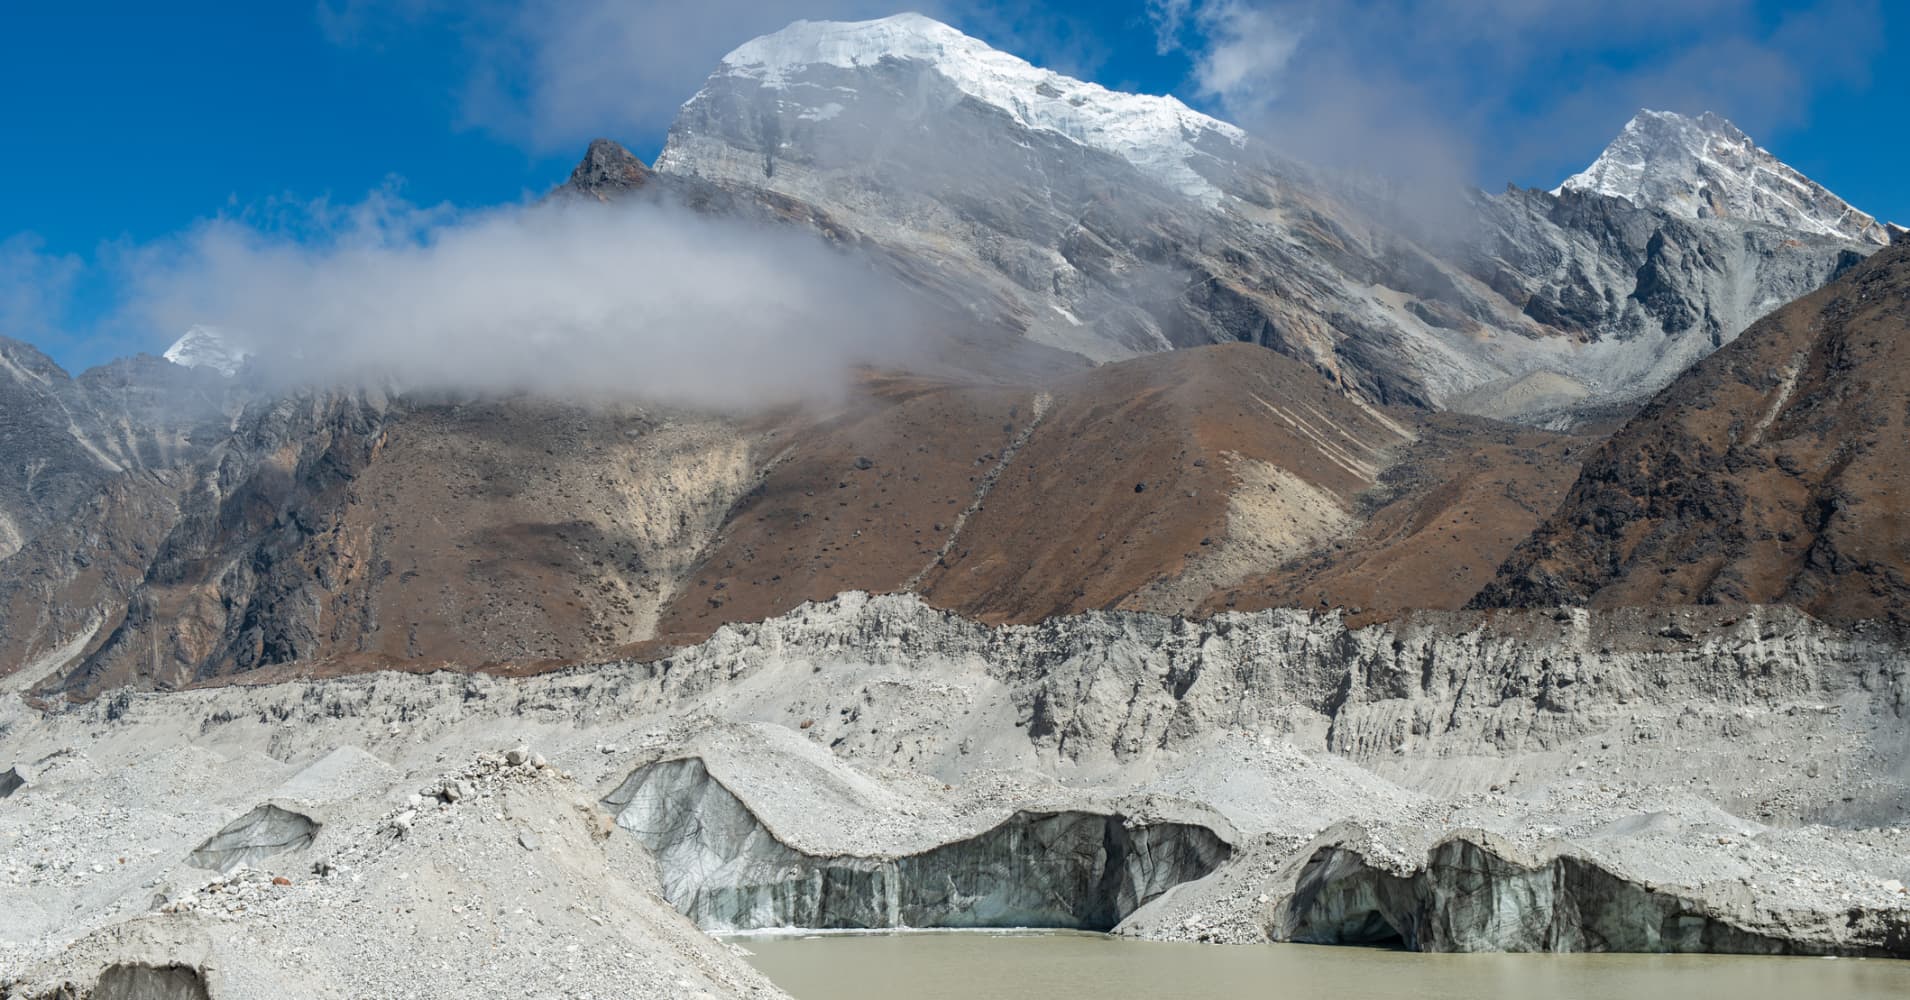 Glaciers are important indicators of global warming and climate change.